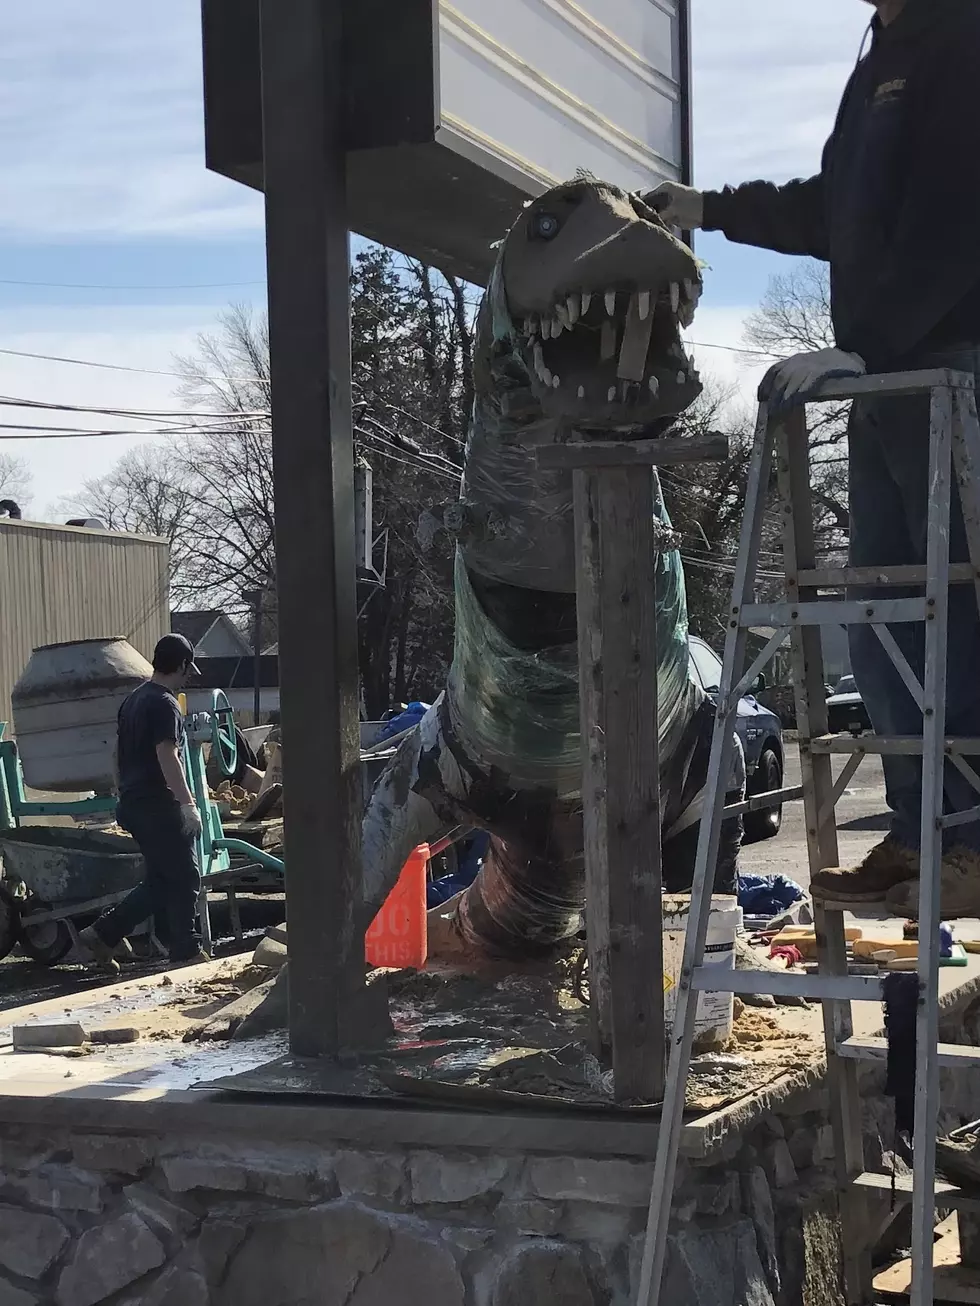 UPDATE &#8211; What&#8217;s Up with the Dinosaur in Beachwood?